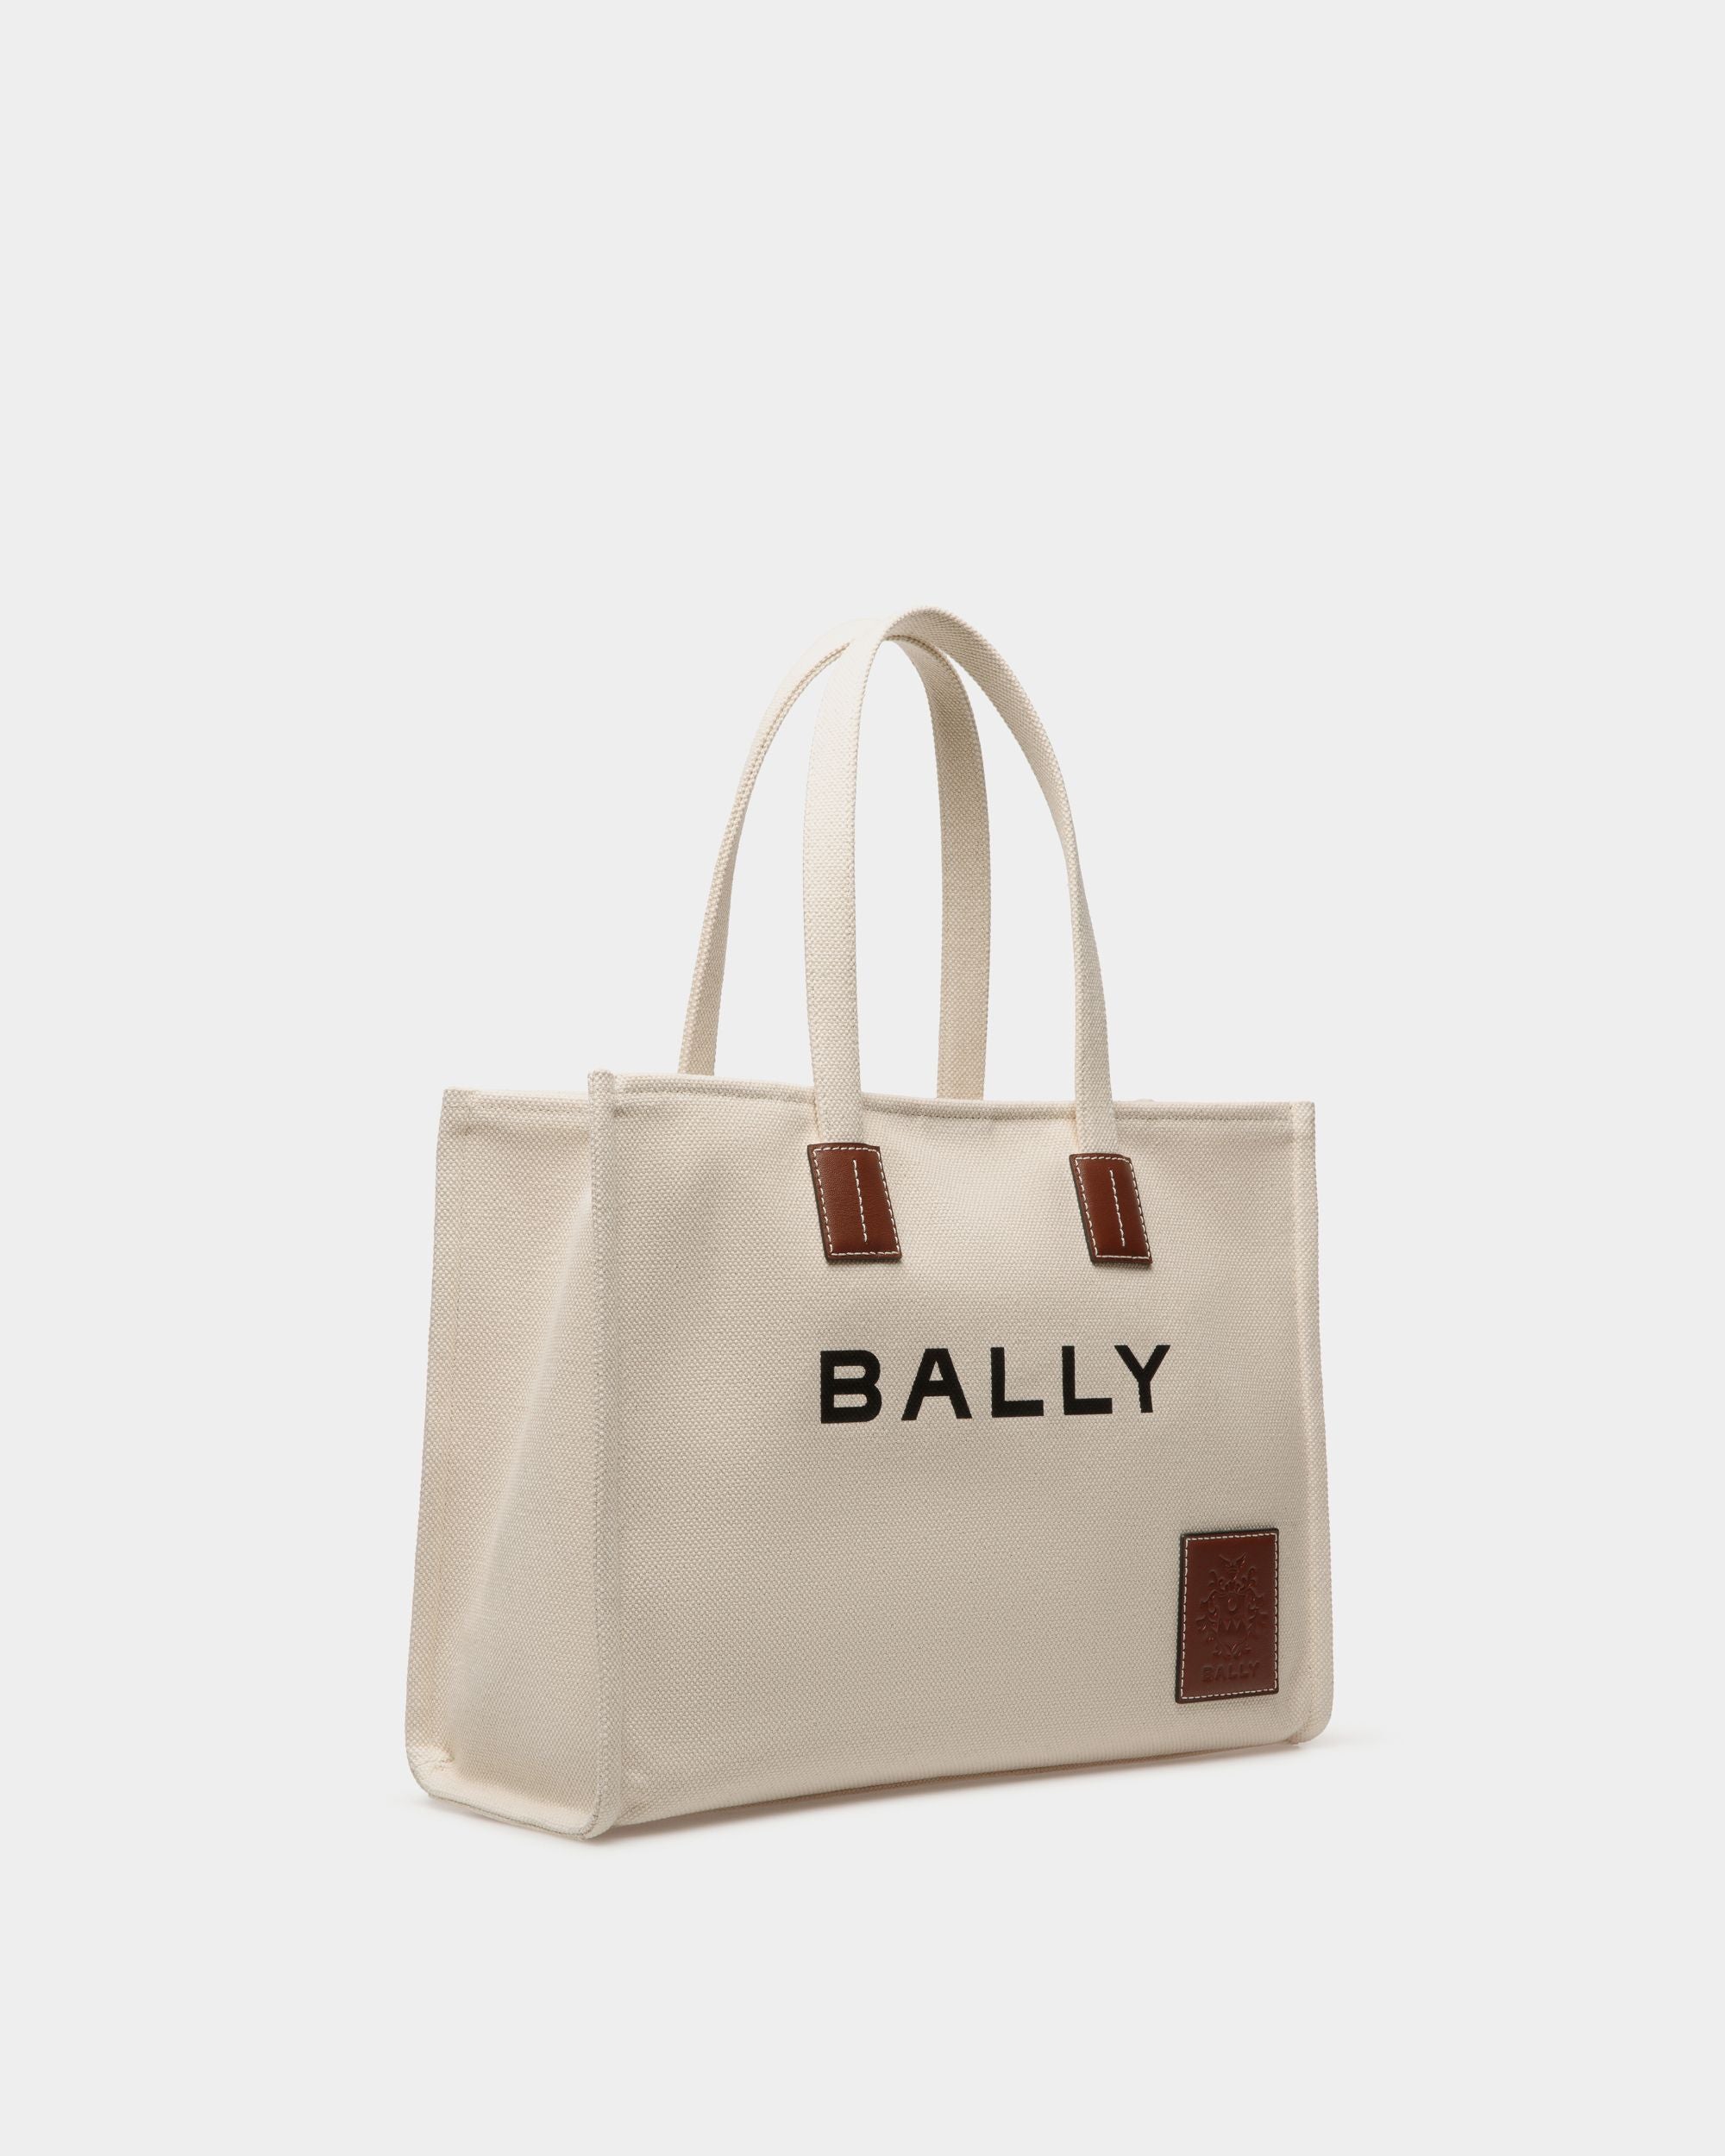 Akelei | Women's Tote Bag in Neutral Canvas | Bally | Still Life 3/4 Front